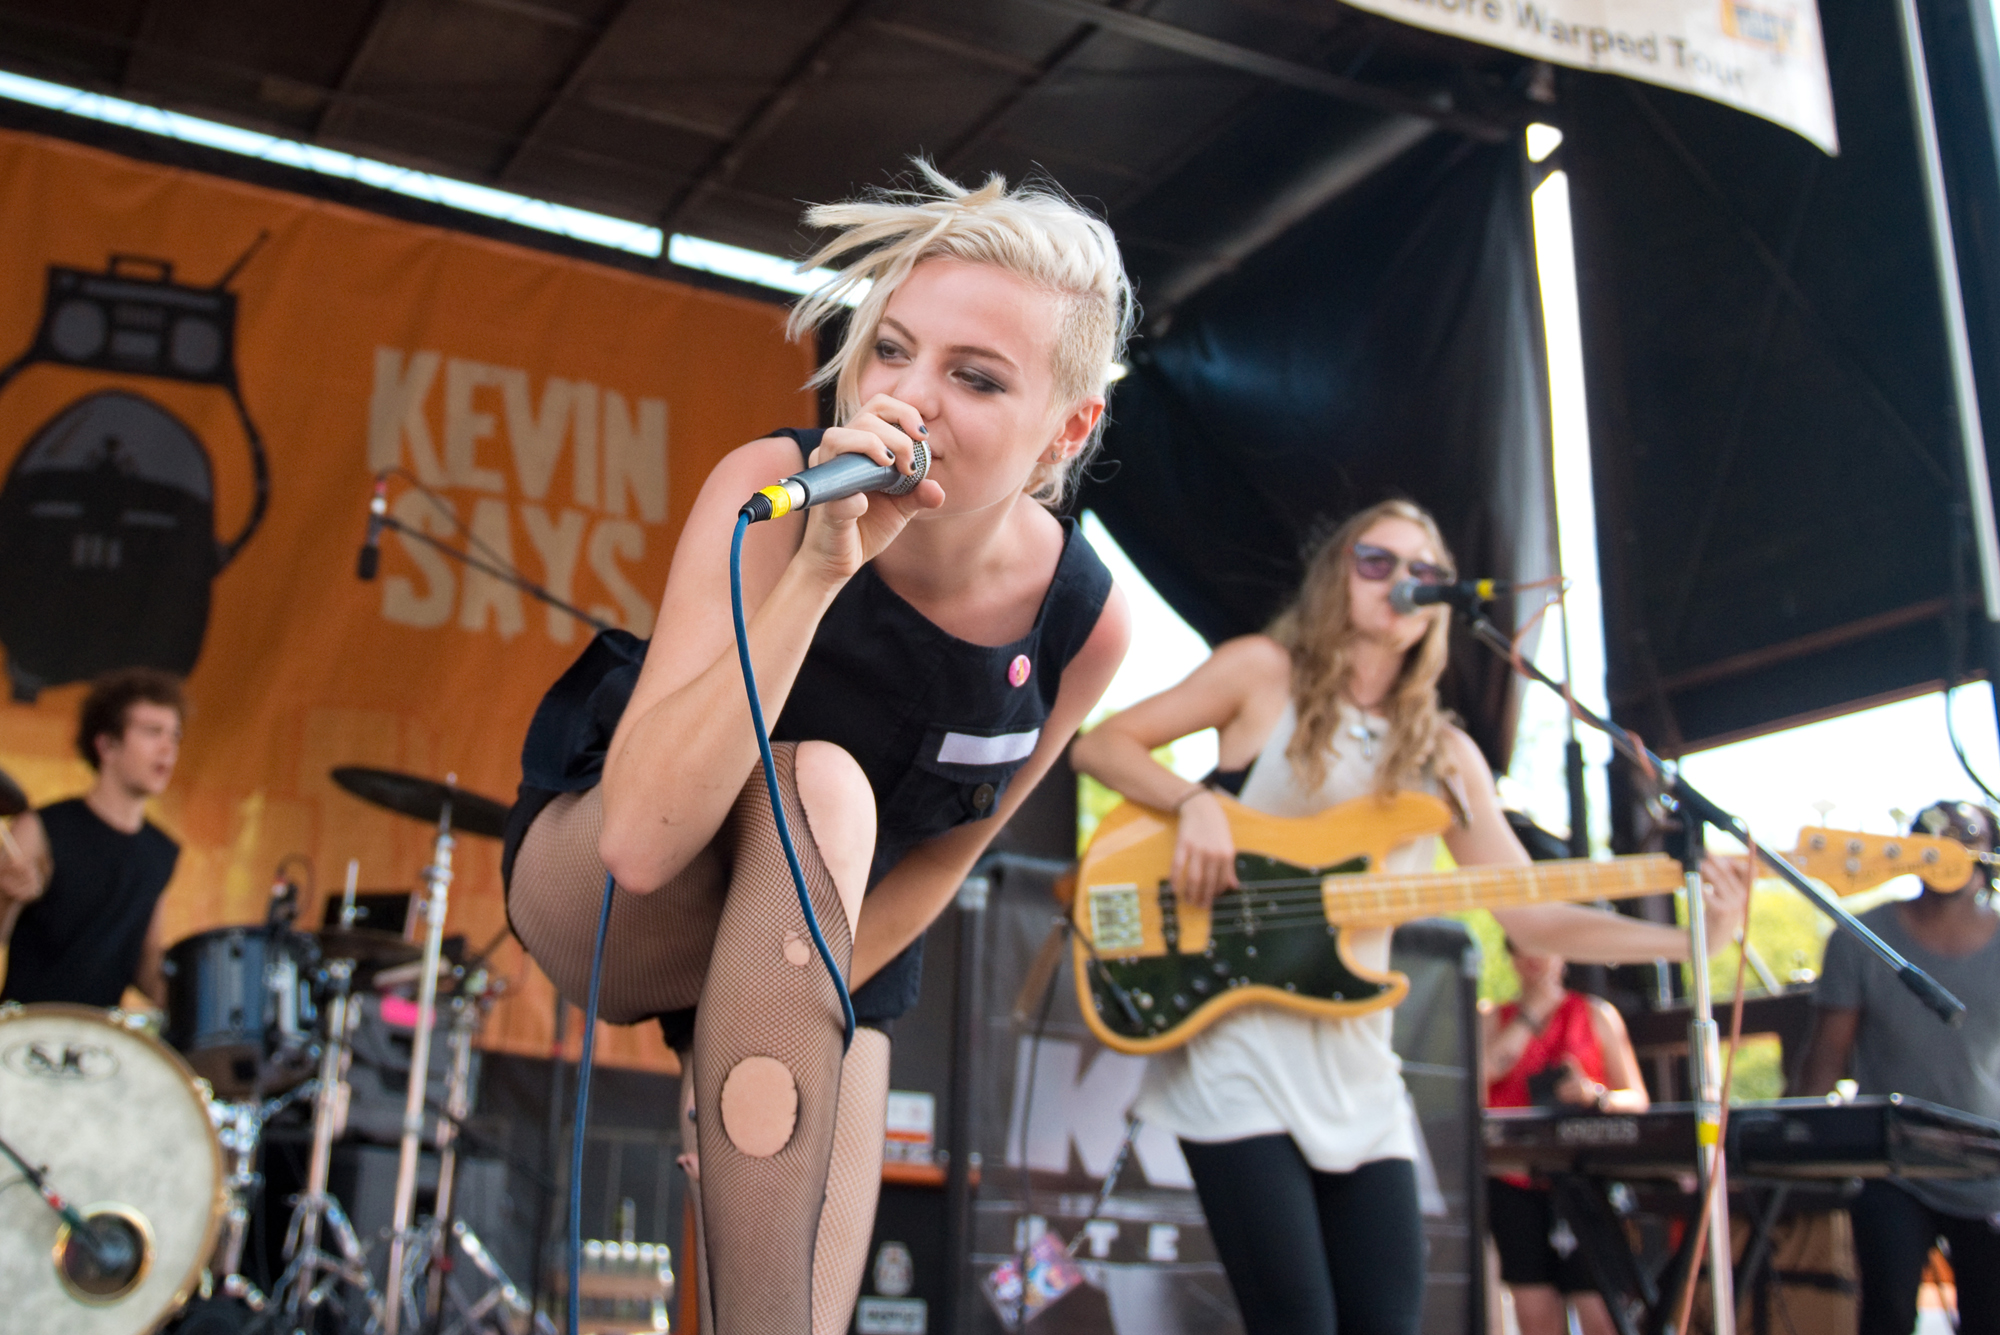 Vans Warped Tour returns to The Pavilion at Montage Mountain in